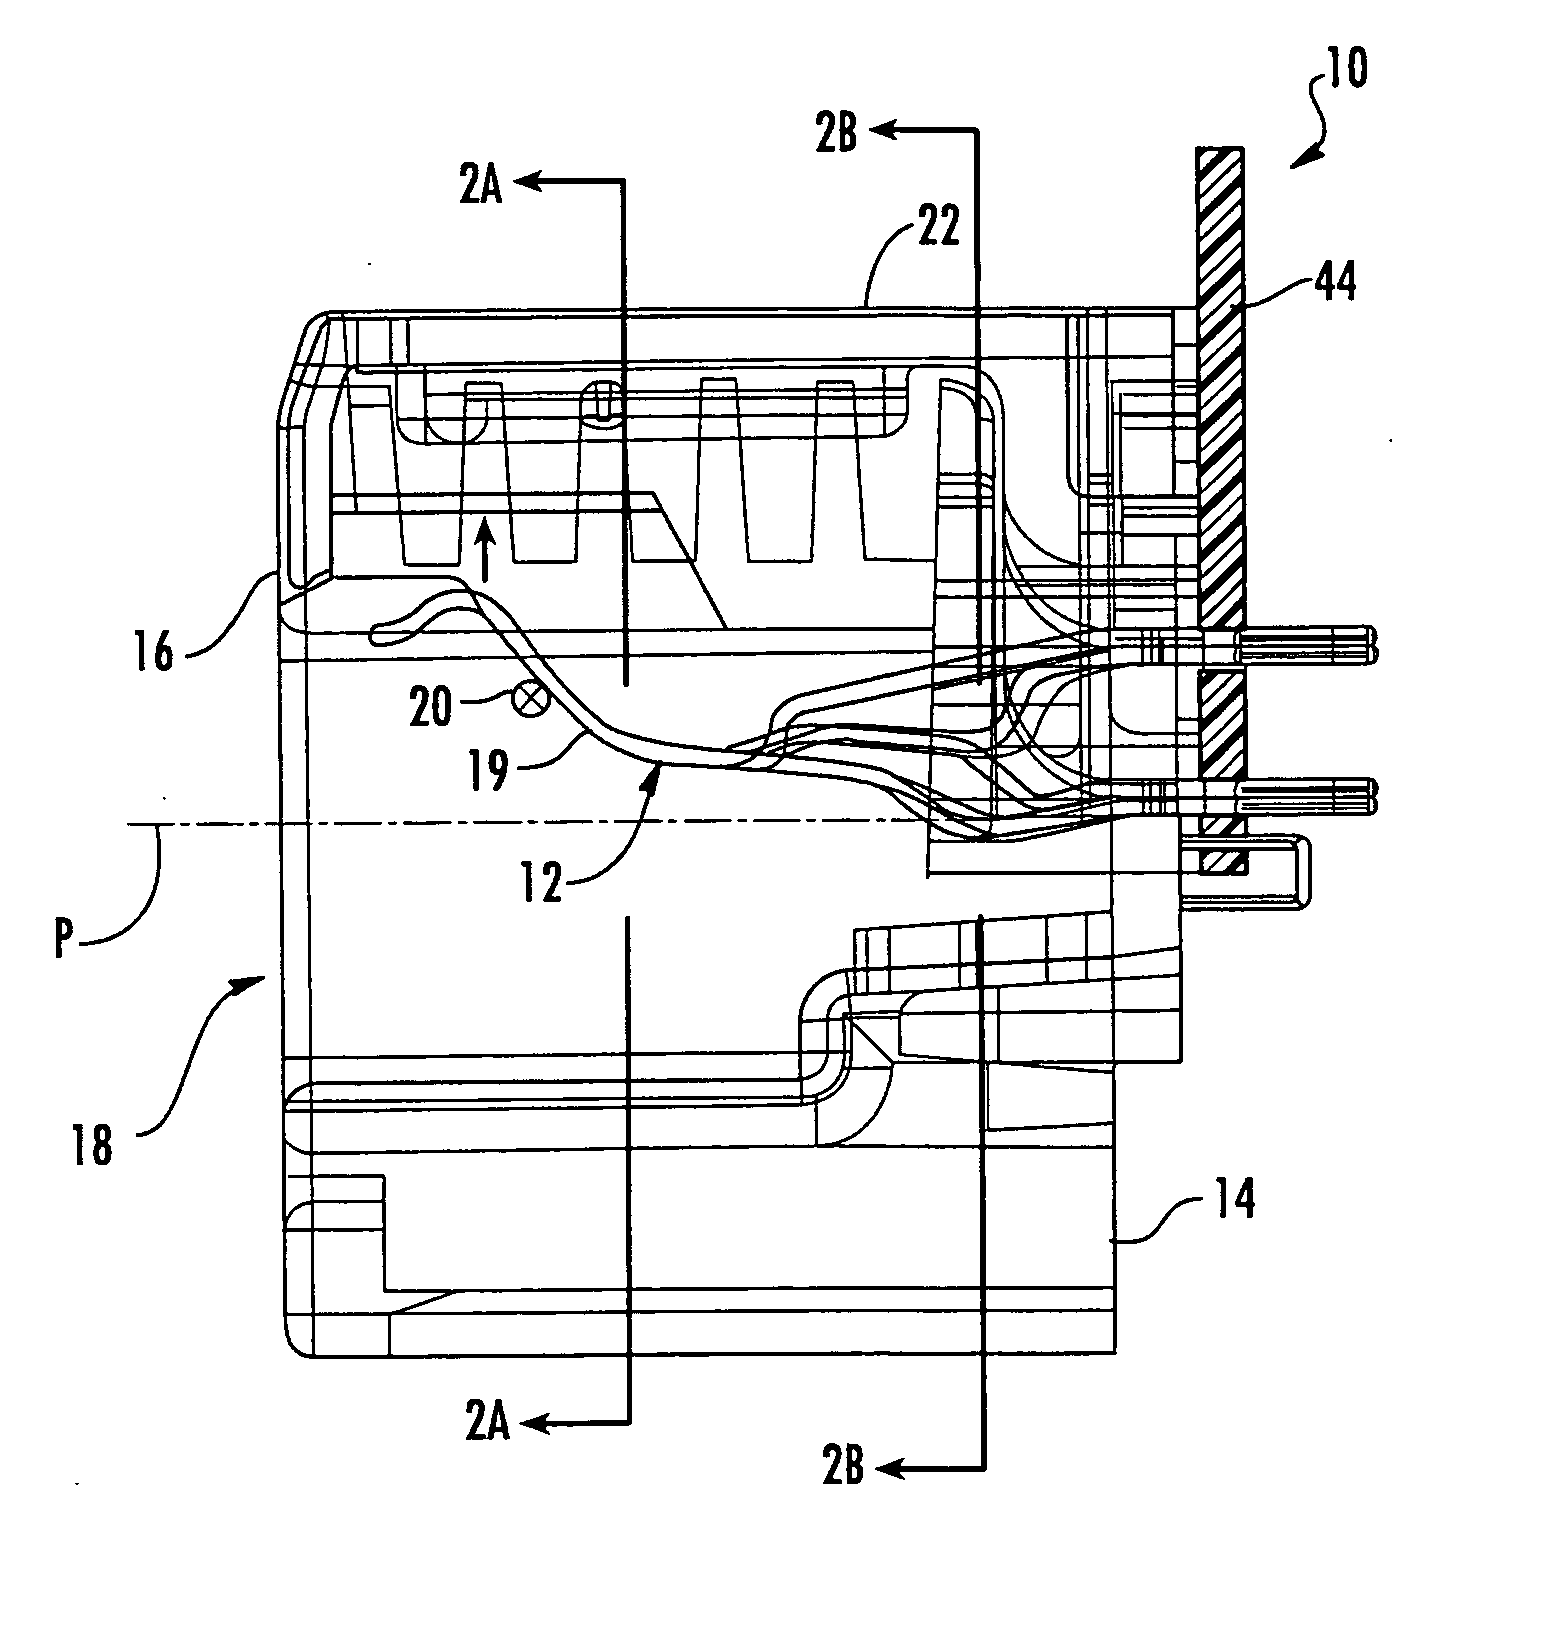 Communications connector with leadframe contact wires that compensate differential to common mode crosstalk